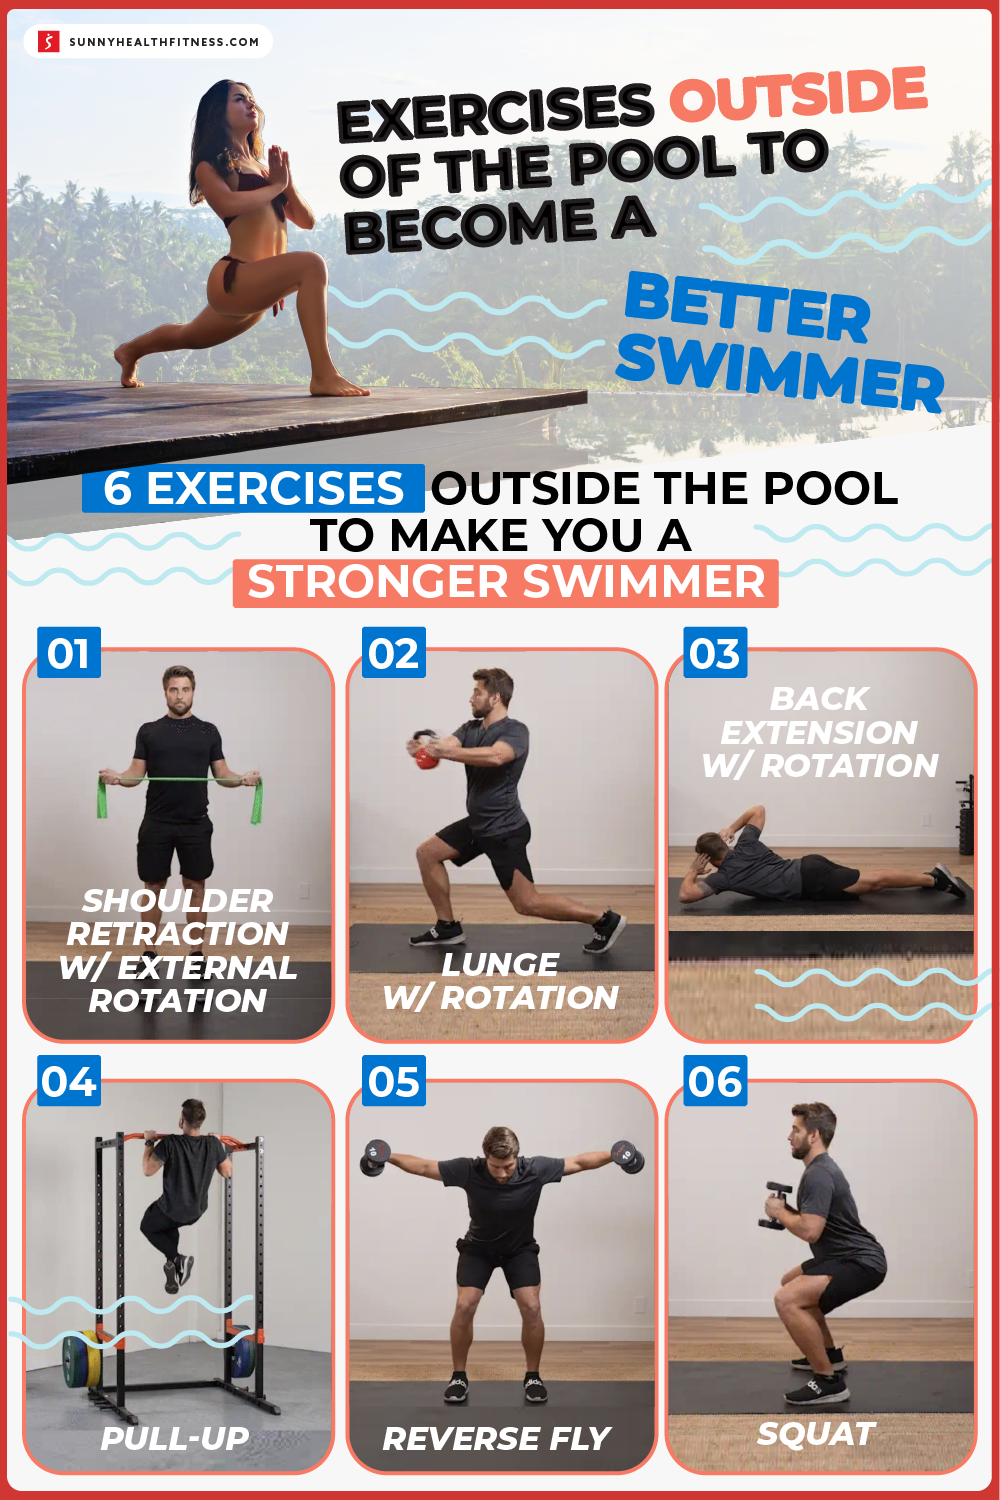 Exercises Outside of the Pool to Become a Better Swimmer infographic